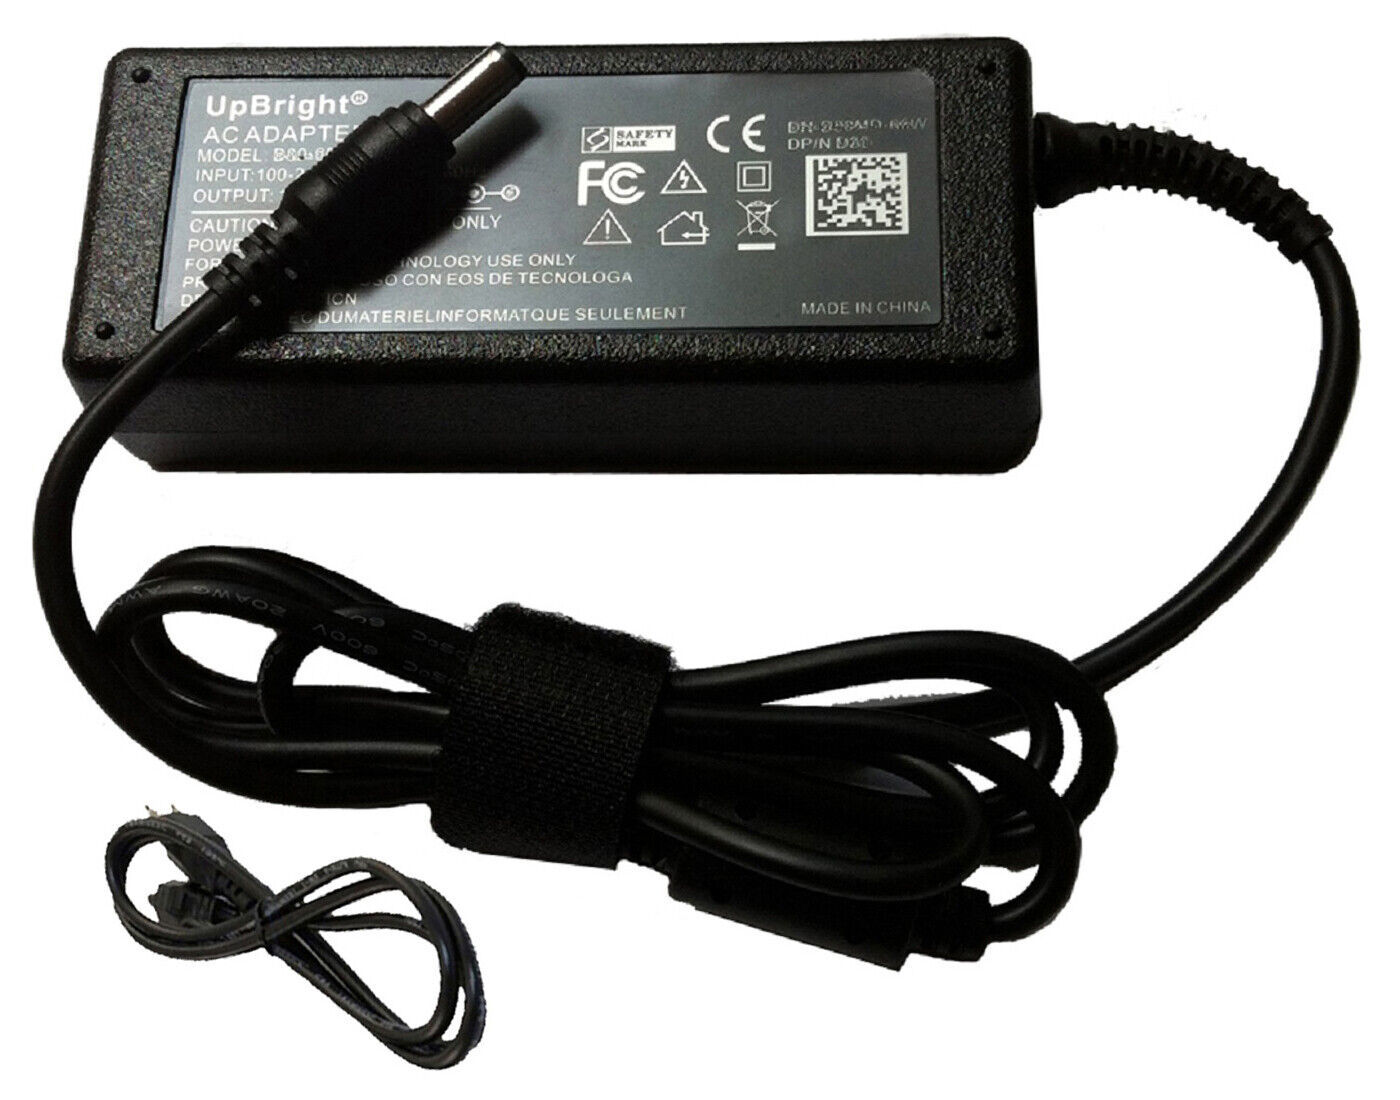 24V Ac Dc Power Adapter Charger For Epson Workforce Pro Gt-S50 Gts50 Scanner - $33.99